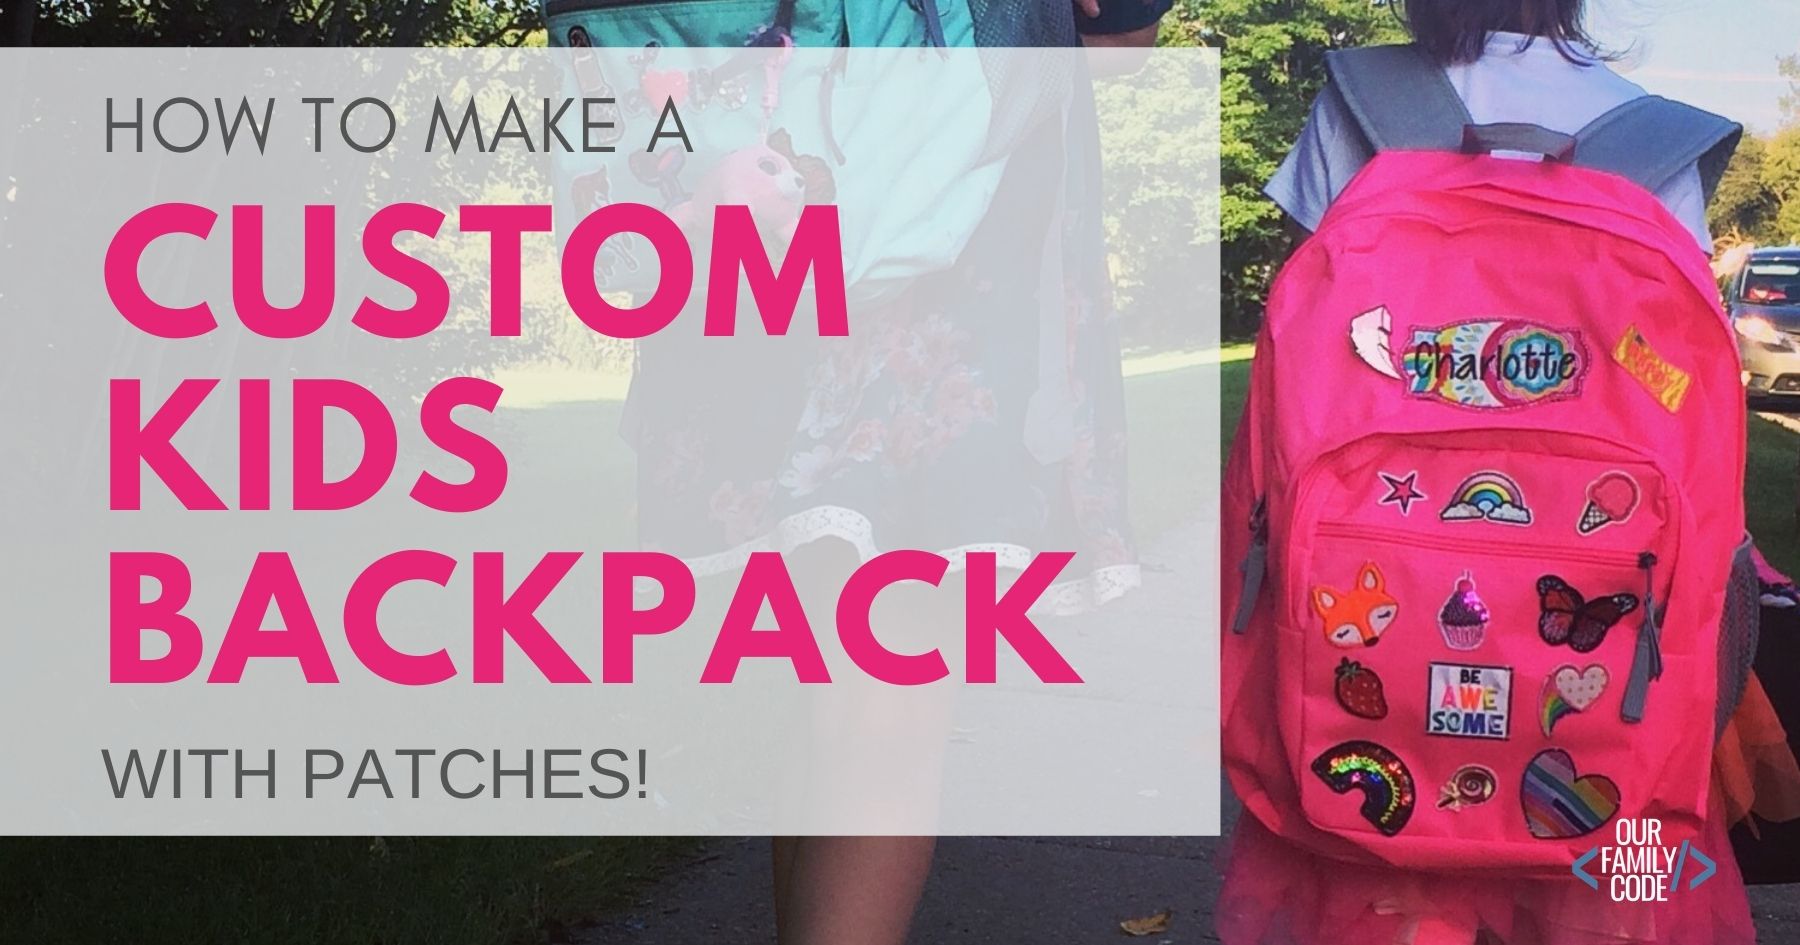 Backpacks are $20+ each these days & every year my kids want a new one. Check out how we solved that problem by designing custom kids backpacks! #backpackpatches #bestbackpacksforschool #coolbackpacksforkids #diybackpacks #customizekidsbackpack #personalizedkidbackpacks #howtosewpatchesonabackpack #sewpatchesonbackpack